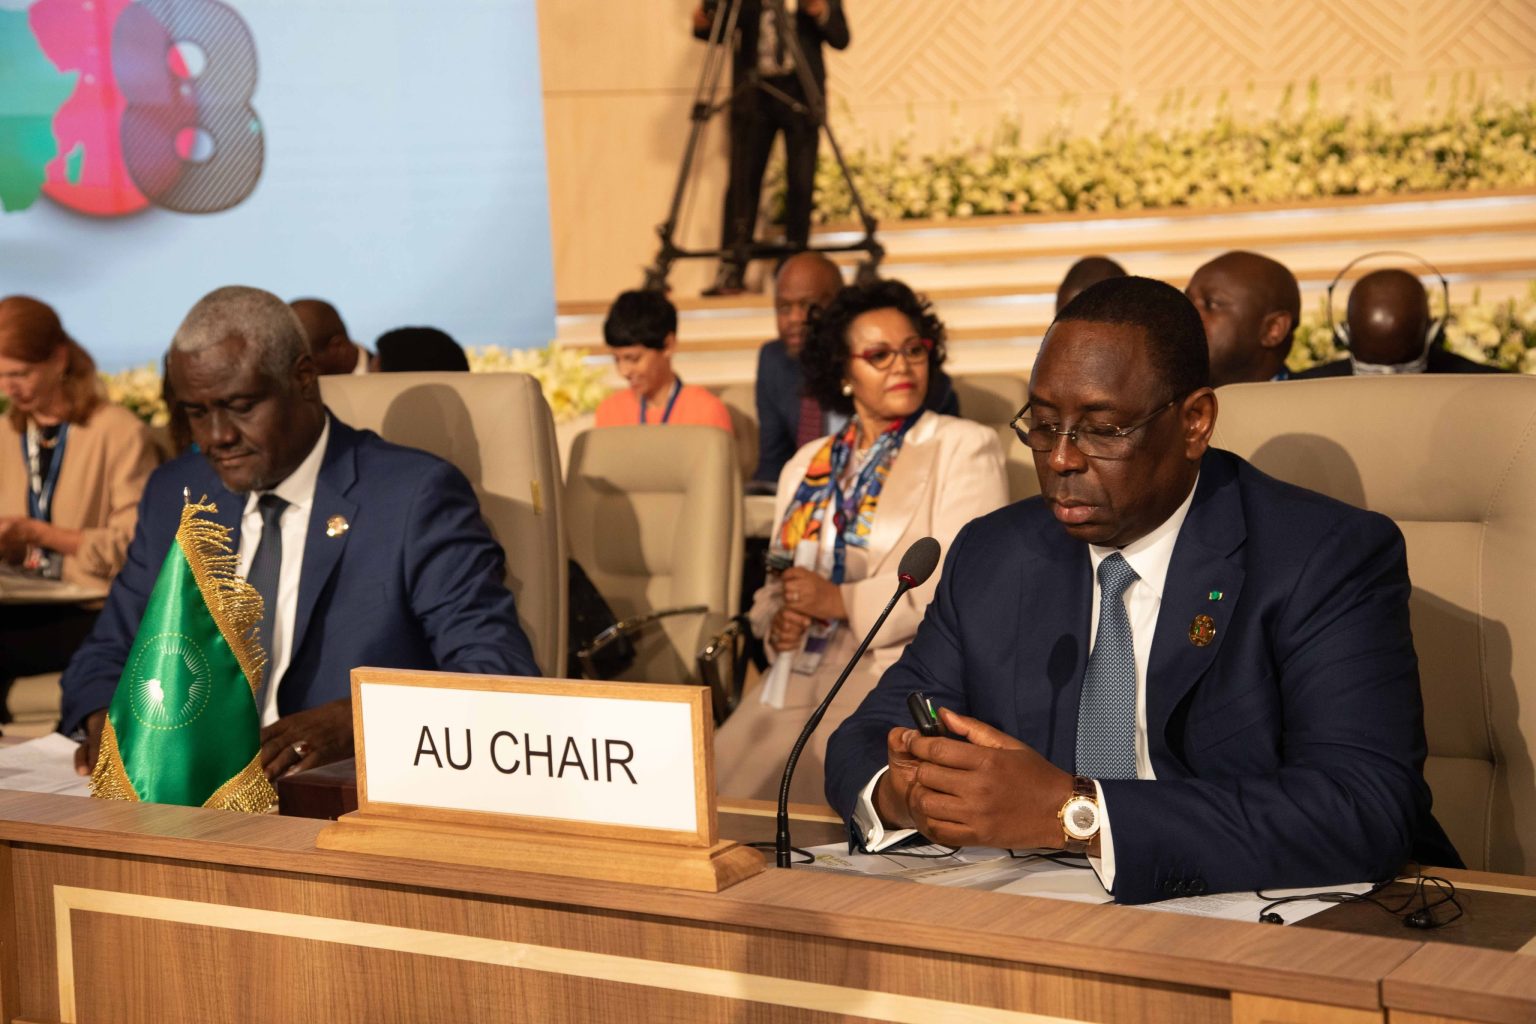 African Union Commission Chairperson Moussa Faki Mahamat and Senegalese President Macky Sall attending TIVCAD8. Start-ups and social enterprises are the biggest beneficiaries as indicated by Japan PM Fumio Kishida's opening remarks. www.theexchange.africa/